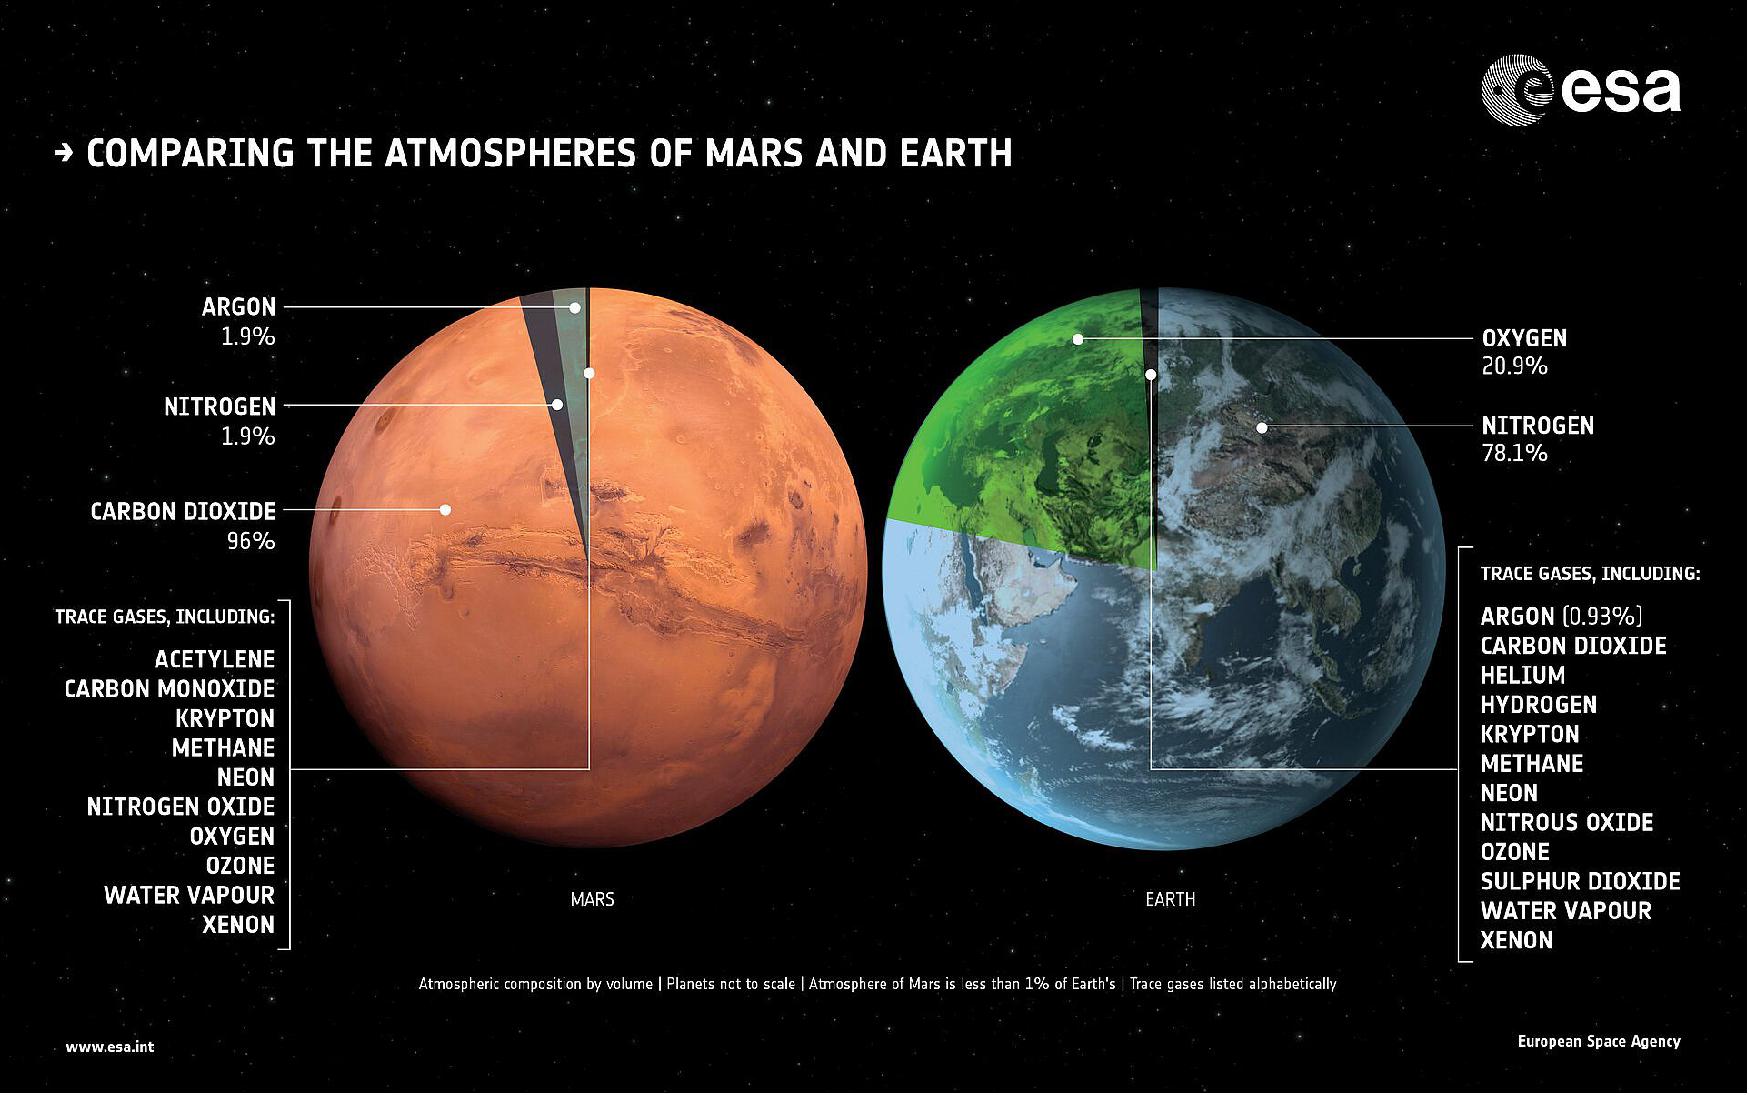 Figure 48: Comparing the atmospheres of Mars and Earth. Mars is about half the size of Earth by diameter and has a much thinner atmosphere, with an atmospheric volume less than 1% of Earth’s. The atmospheric composition is also significantly different: primarily carbon dioxide-based, while Earth’s is rich in nitrogen and oxygen. The atmosphere has evolved: evidence on the surface suggest that Mars was once much warmer and wetter. - The planets in this graphic are not to scale. Mars atmospheric values are as measured by NASA’s Curiosity rover. (image credit: ESA)